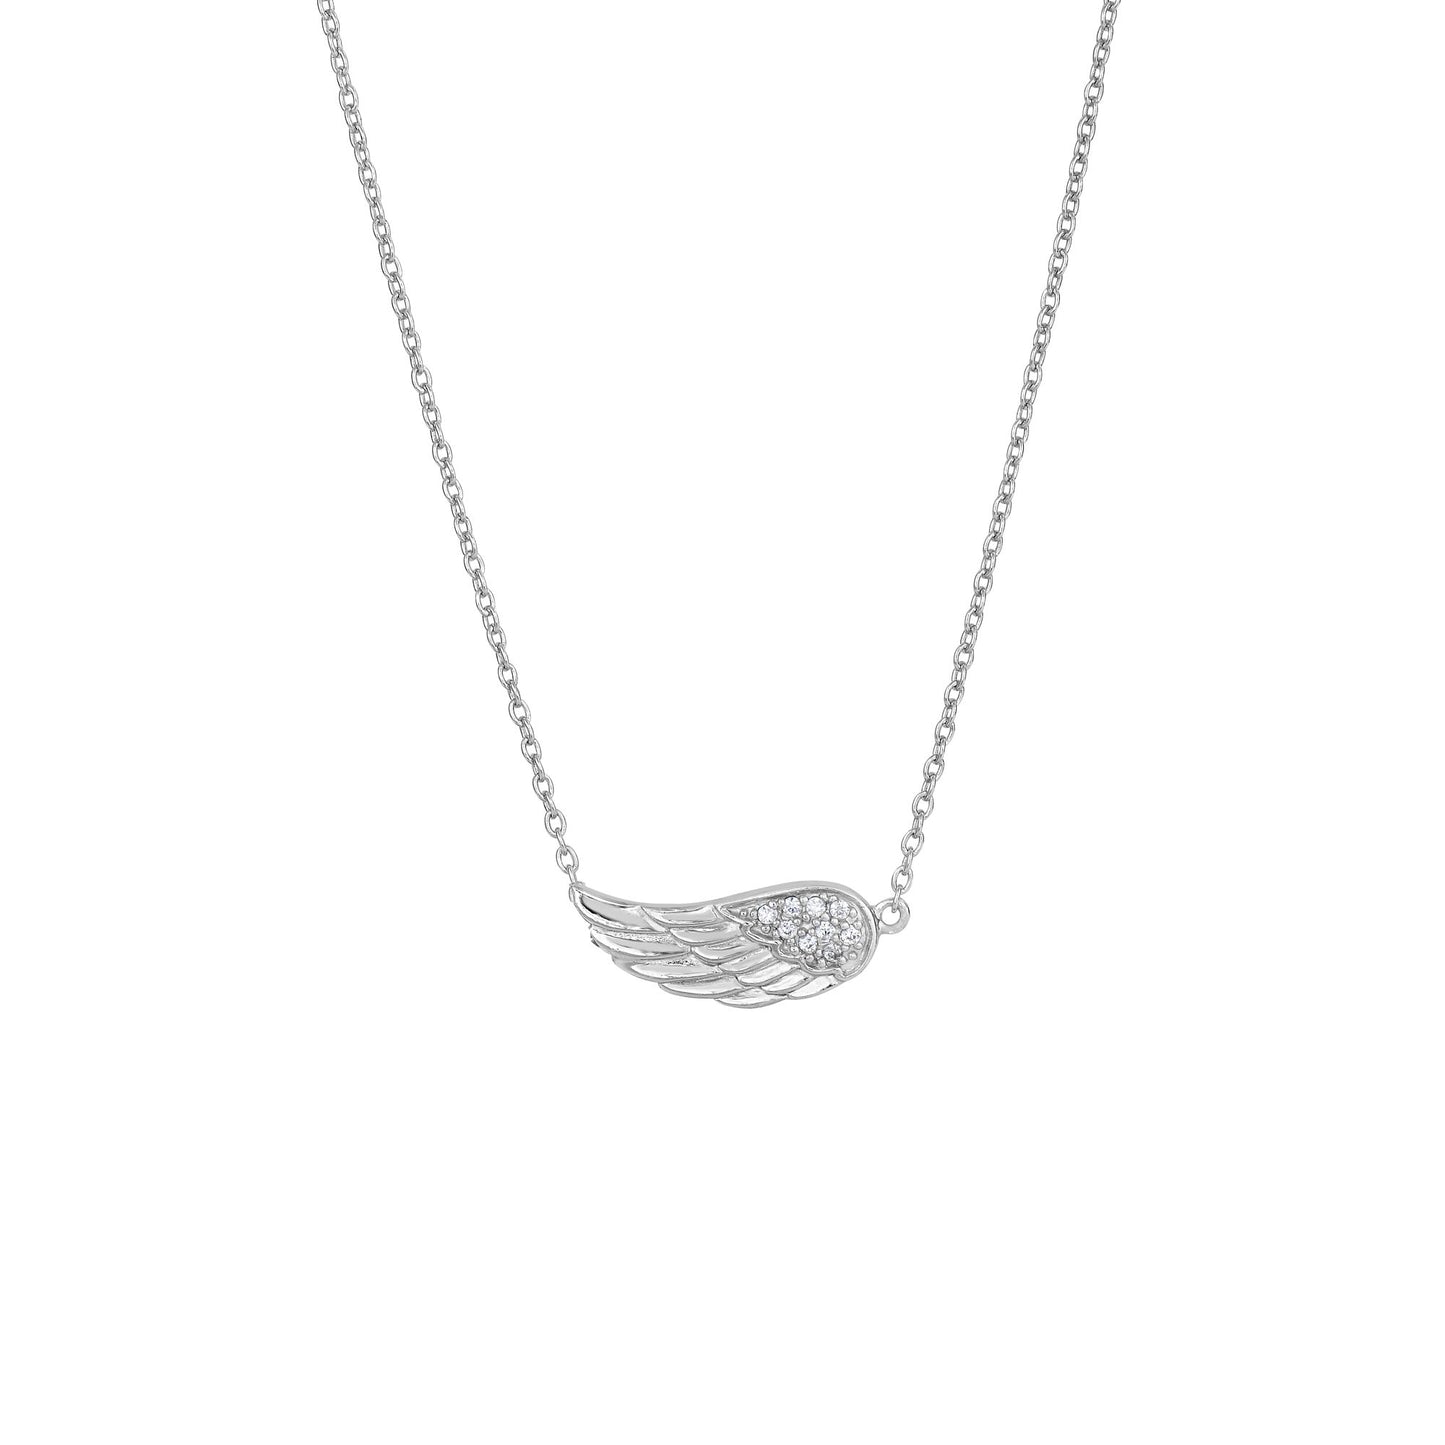 Sterling Silver and CZ Sideways Angel Wing Pendant Charm Necklace